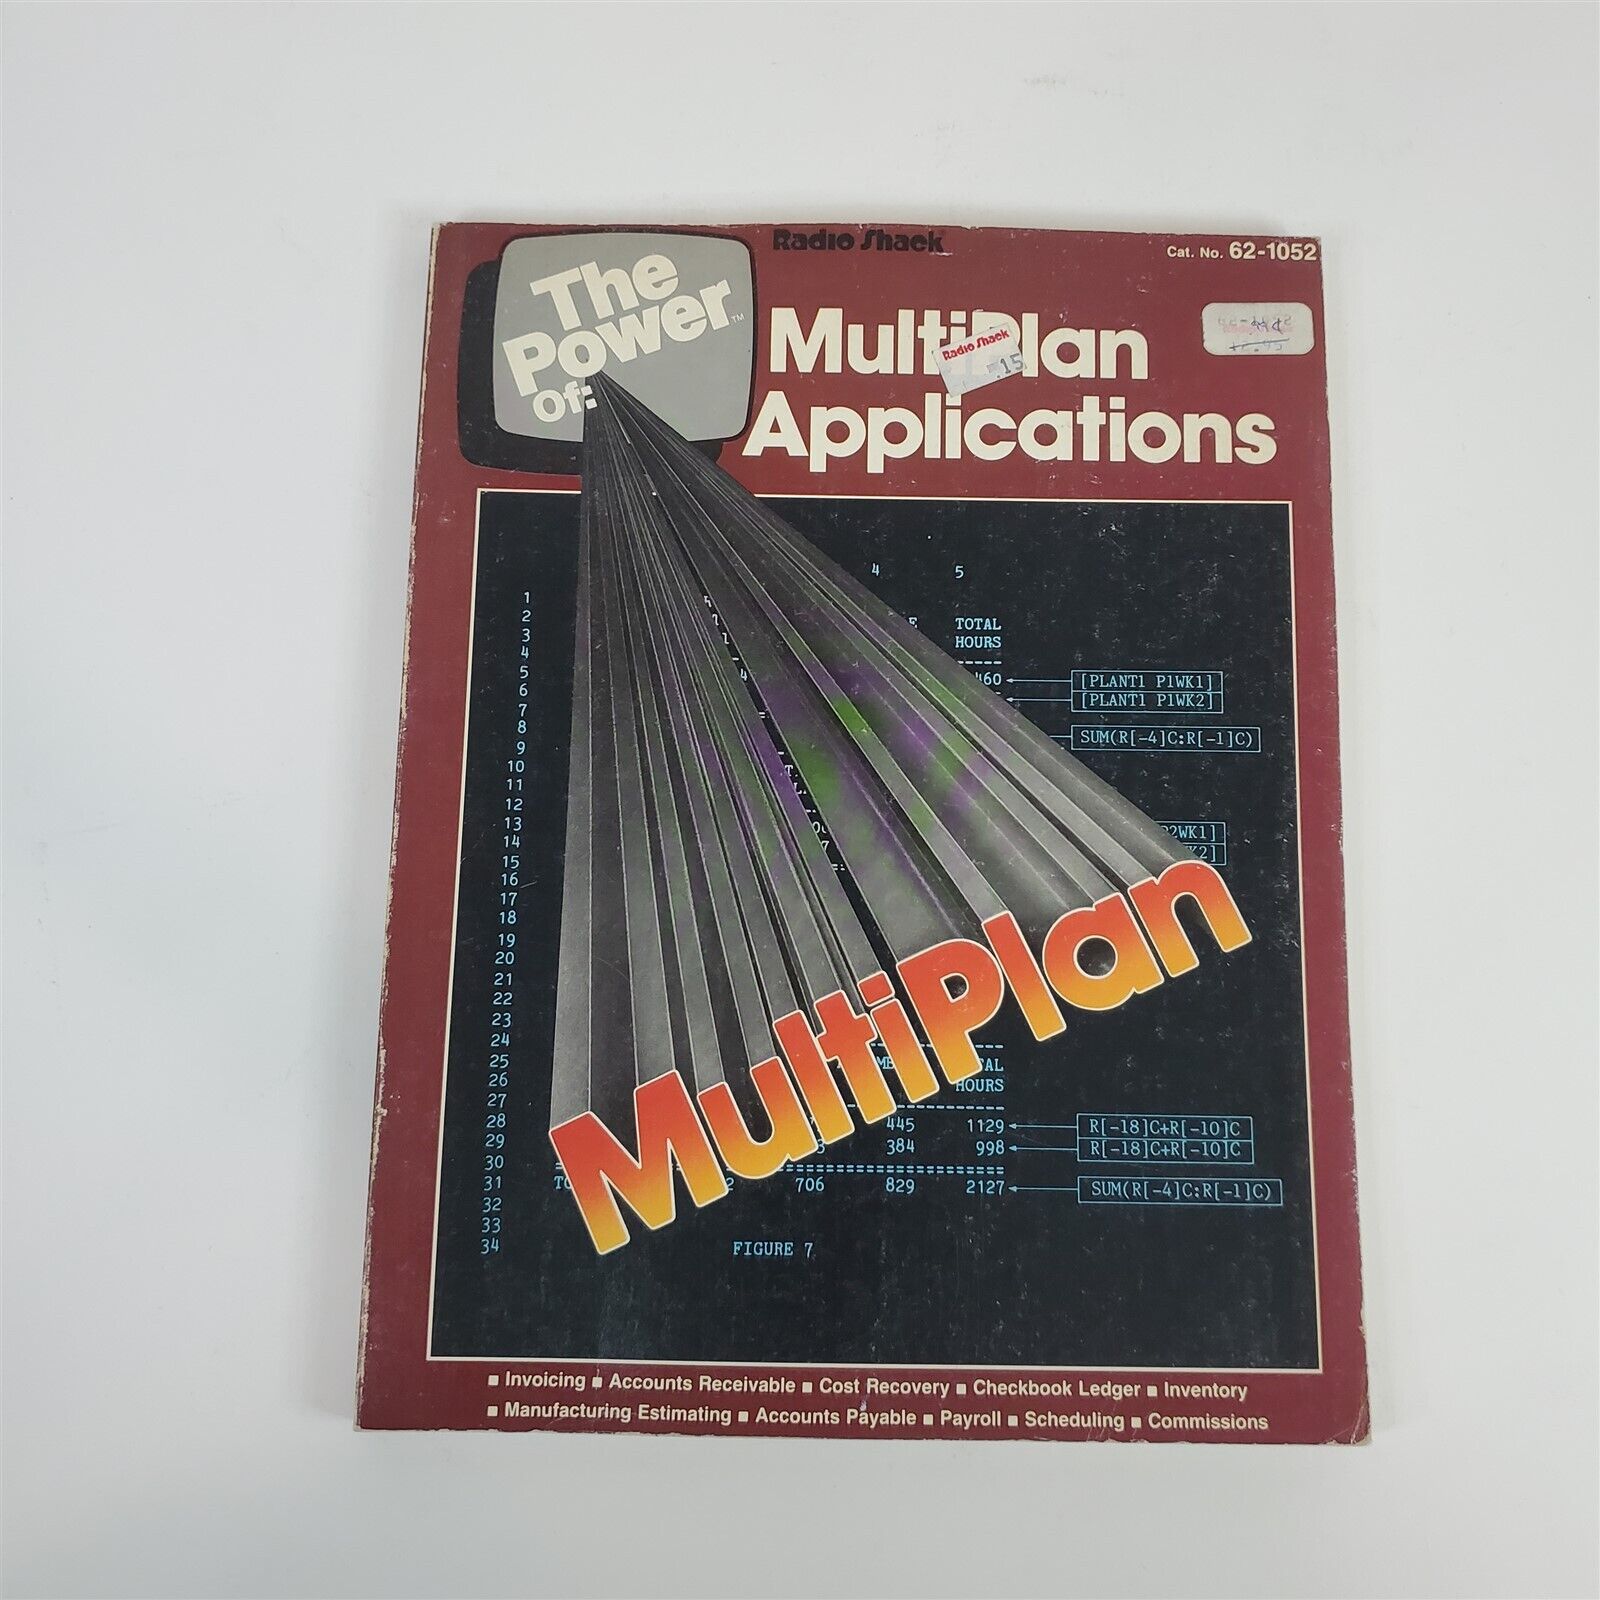 Vintage The Power Of: Multiplan Applications by Radio Shack 62-1052